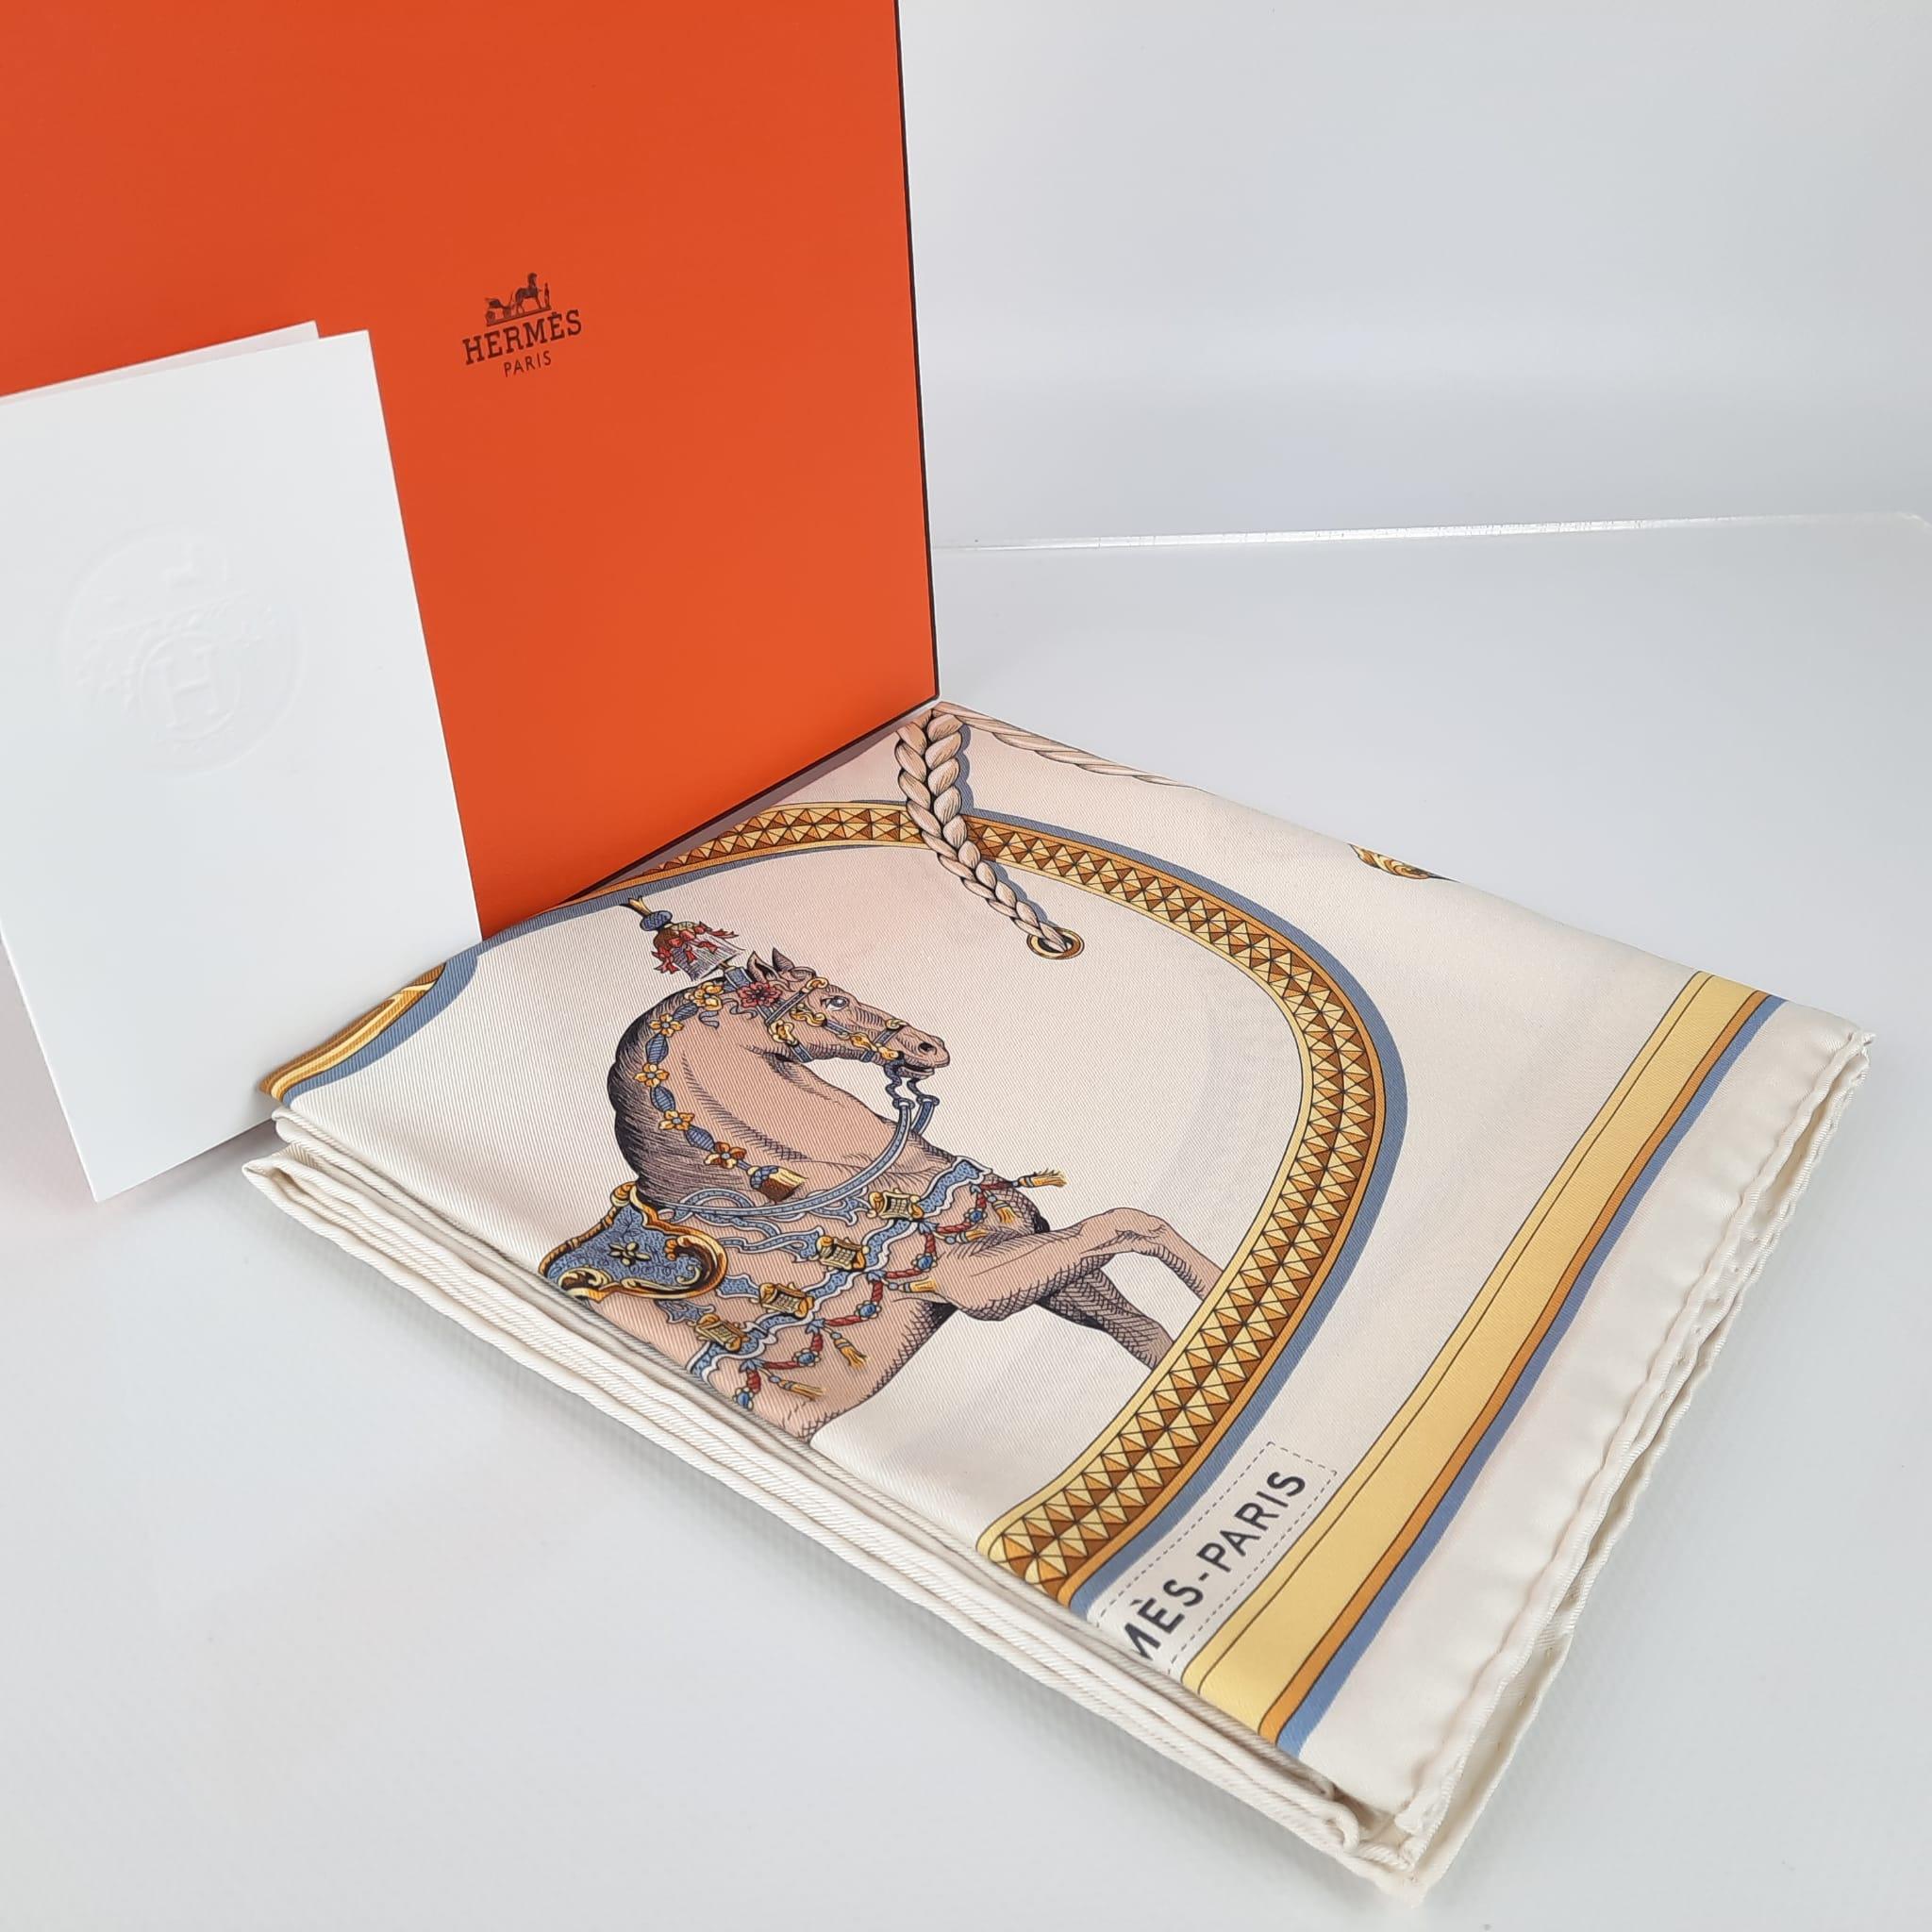 Hermes Crème / Gold / Multicolore Grand Apparat forever scarf 90 3